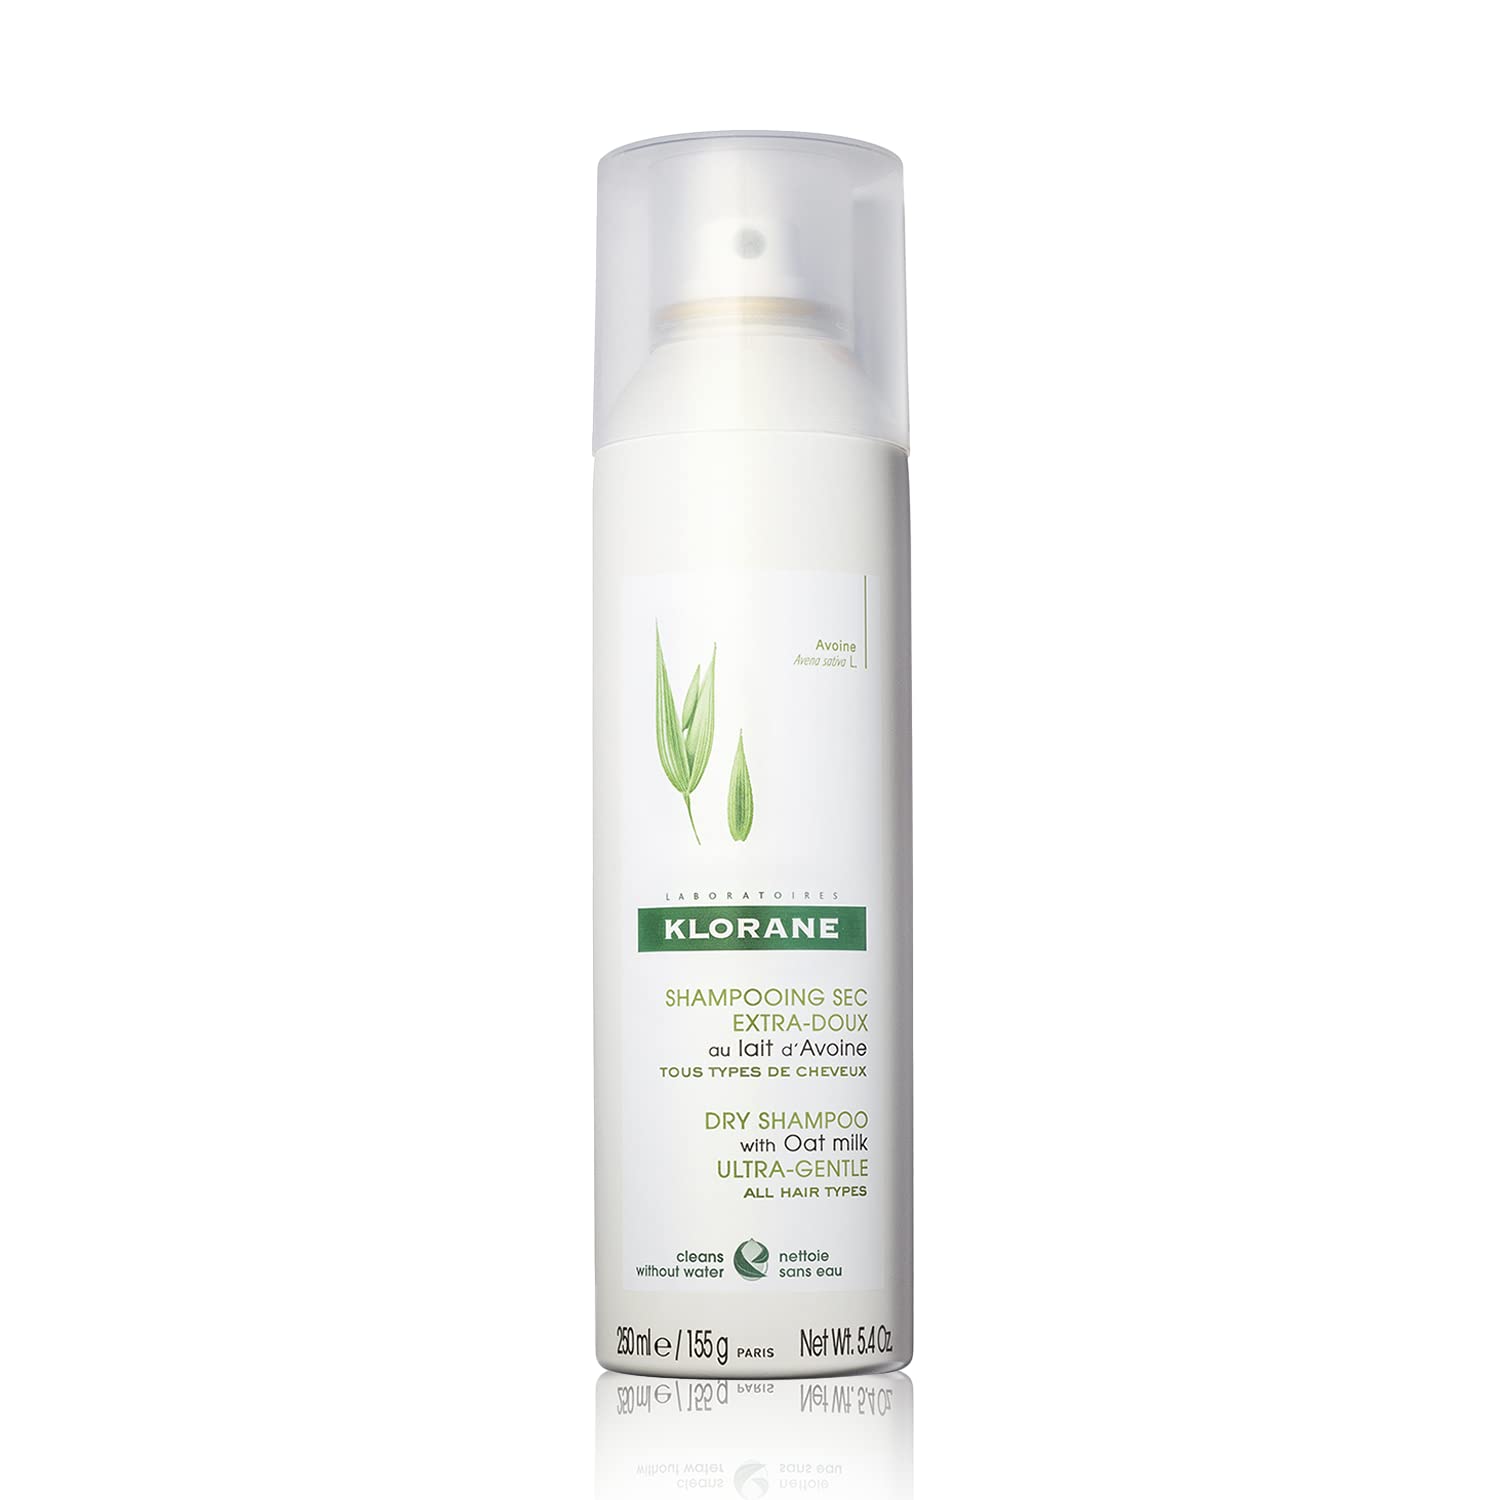 Klorane - Dry Shampoo With Oat Milk - Gentle Formula Instantly Revives Hair - Paraben & Sulfate-Free